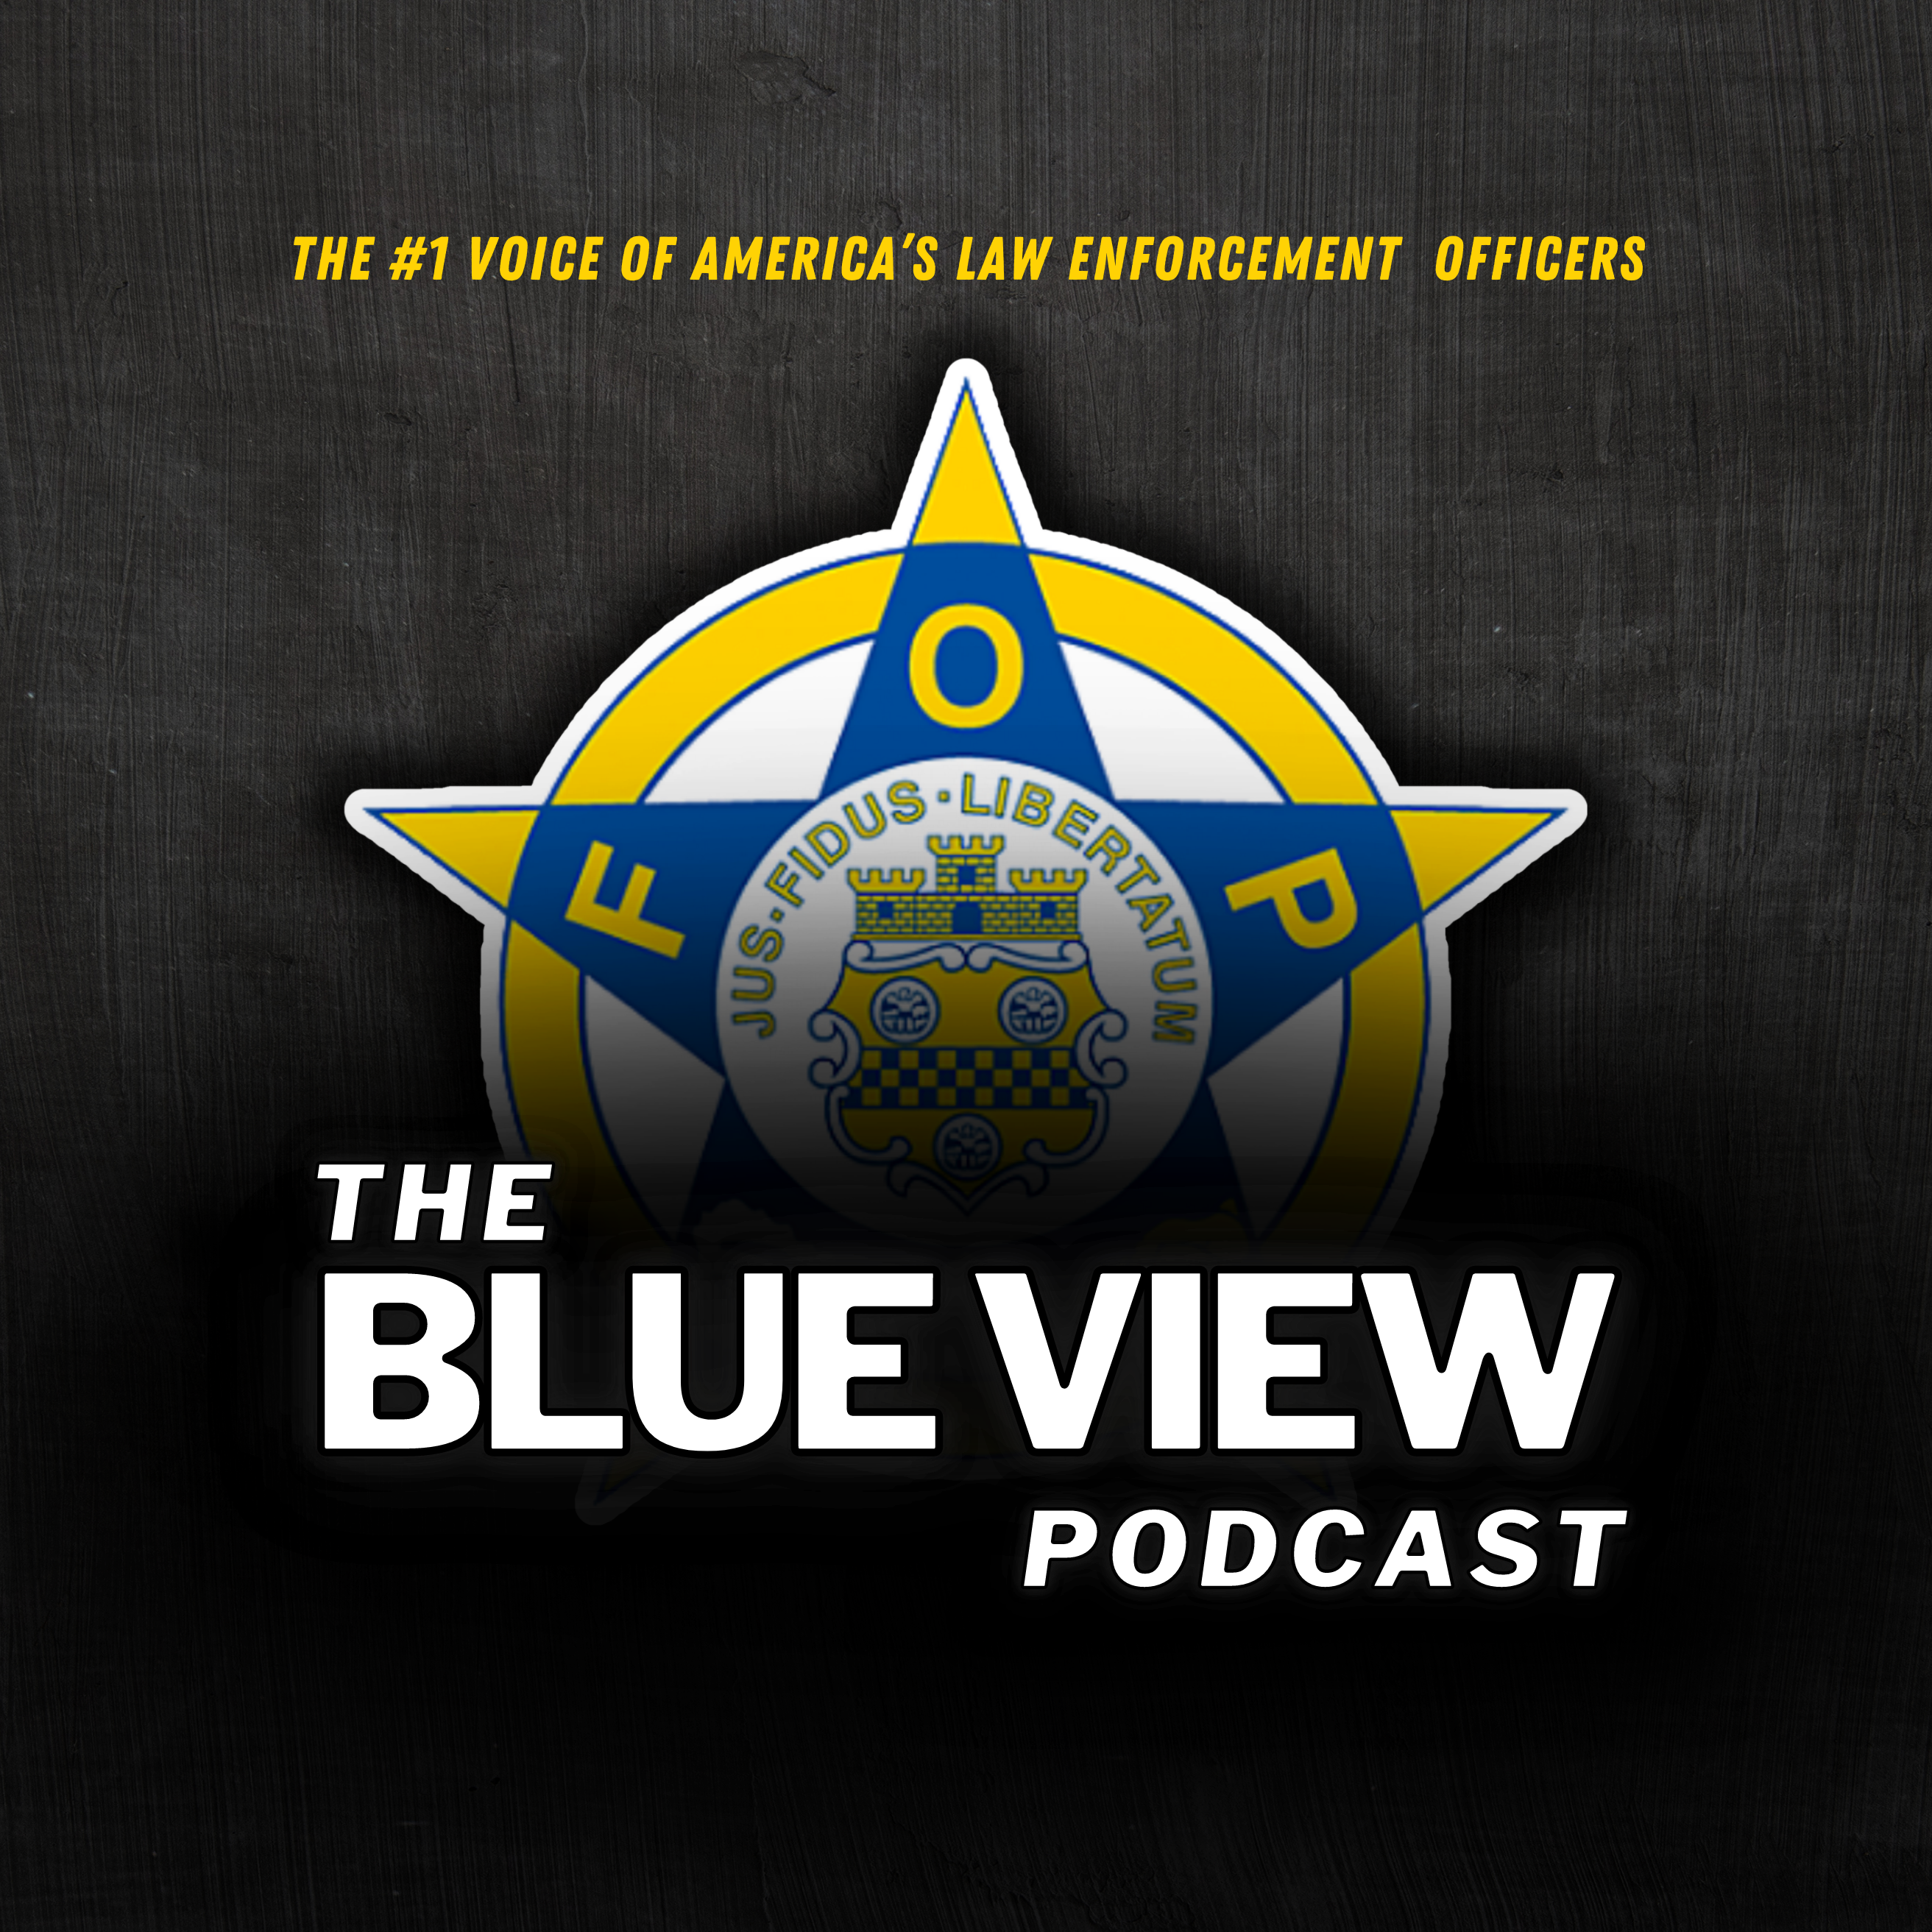 The Reality Of Now: The Challenges Facing America's Law Enforcement with Hugh Clements